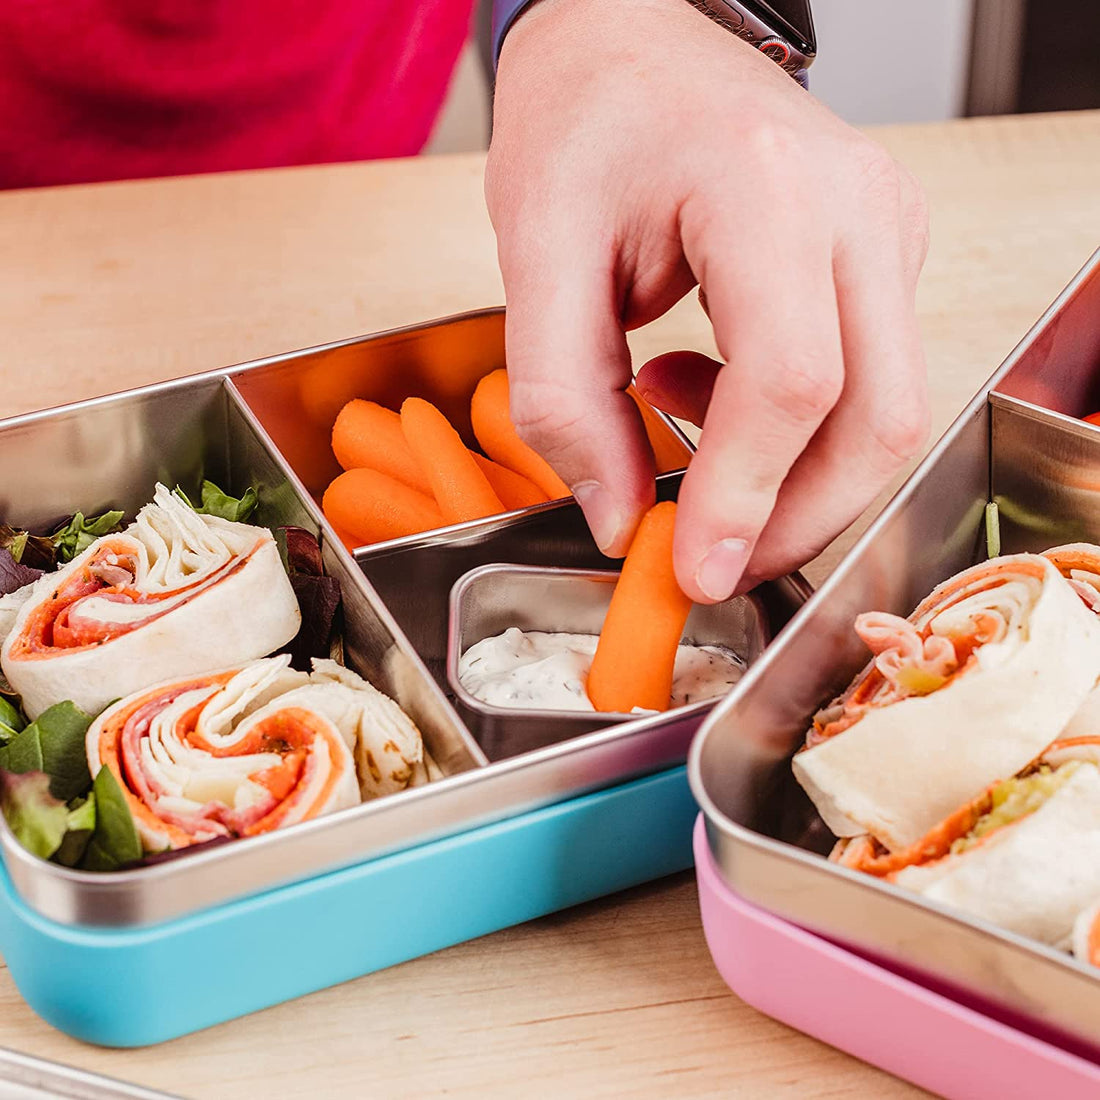  Yosoo Stainless Steel Lunch Box, 4 Grid Portable Bento Box,  Food Storage Container, Good Sealing Performance, Includes Spoons and  Chopsticks (Four grid lunch box with soup bowl: green): Home & Kitchen